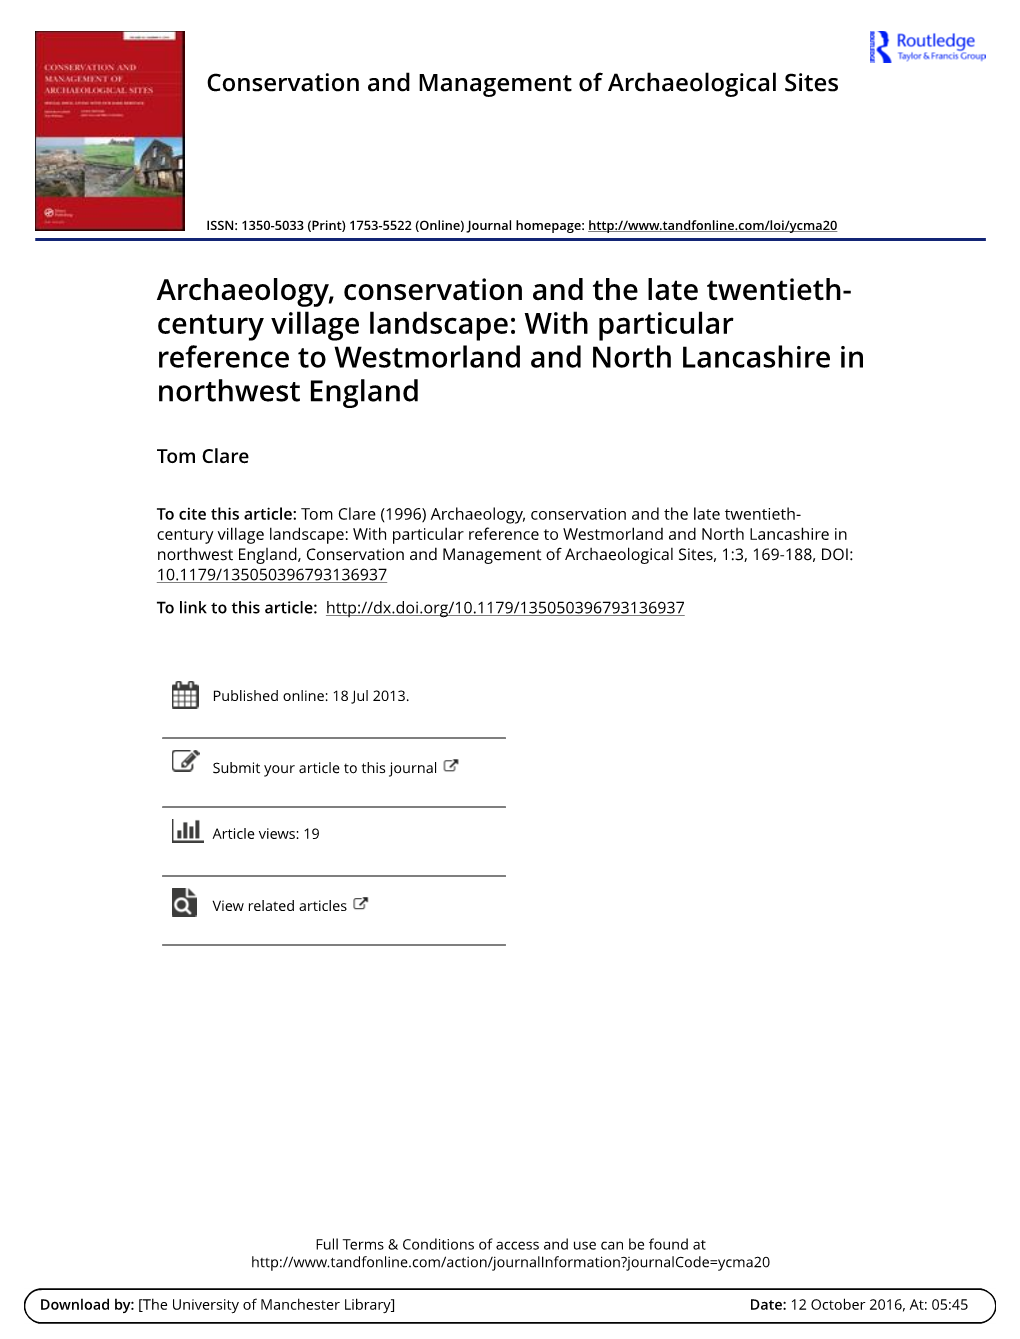 Archaeology, Conservation and the Late Twentieth- Century Village Landscape: with Particular Reference to Westmorland and North Lancashire in Northwest England